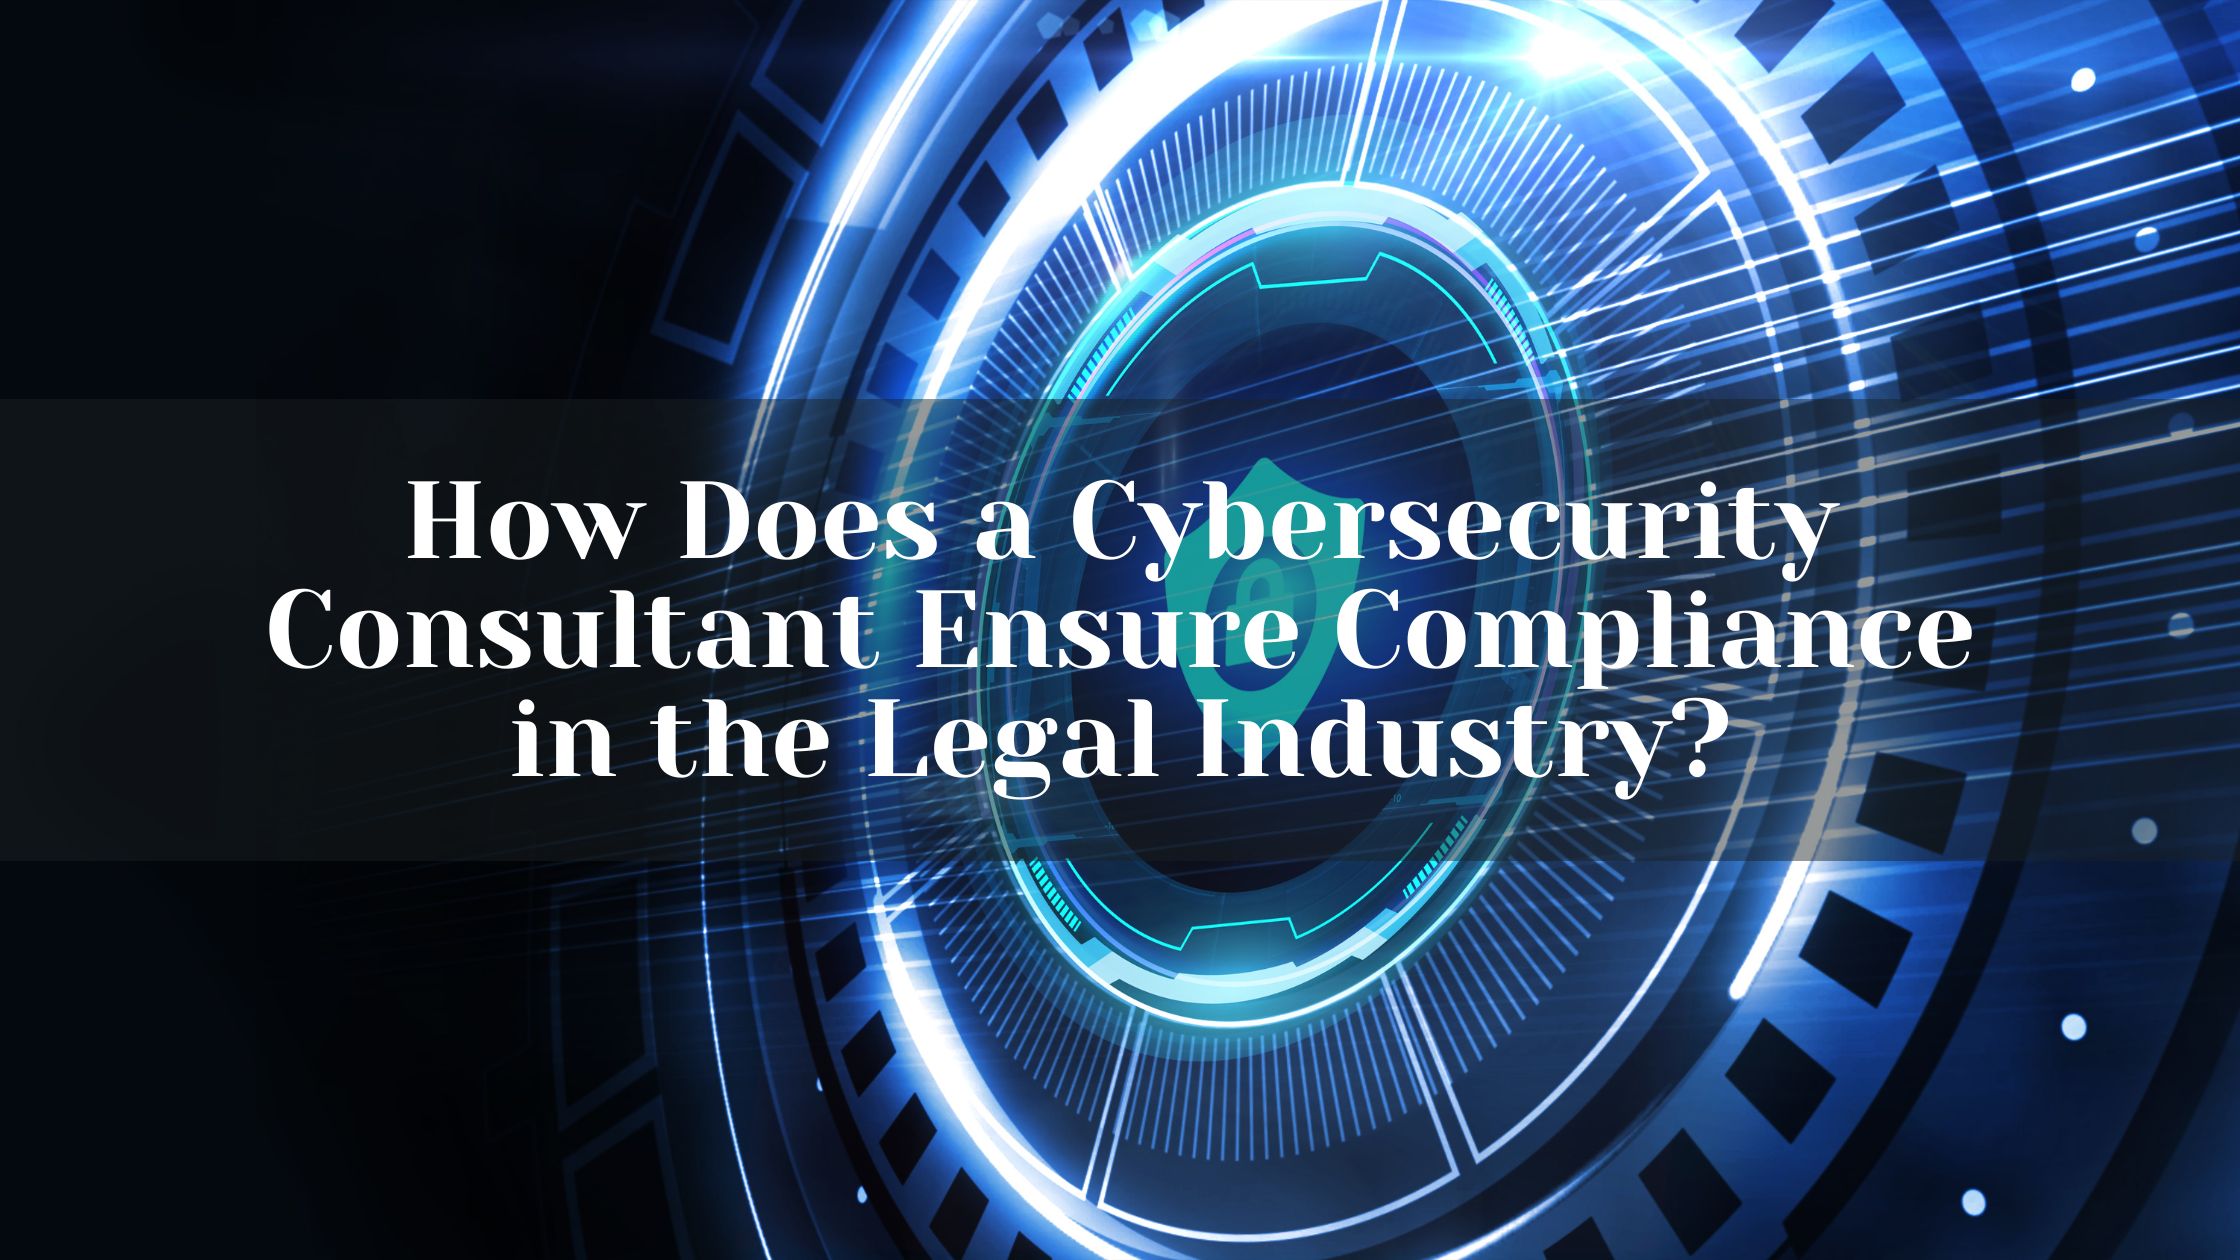 How Does a Cybersecurity Consultant Ensure Compliance in the Legal Industry?